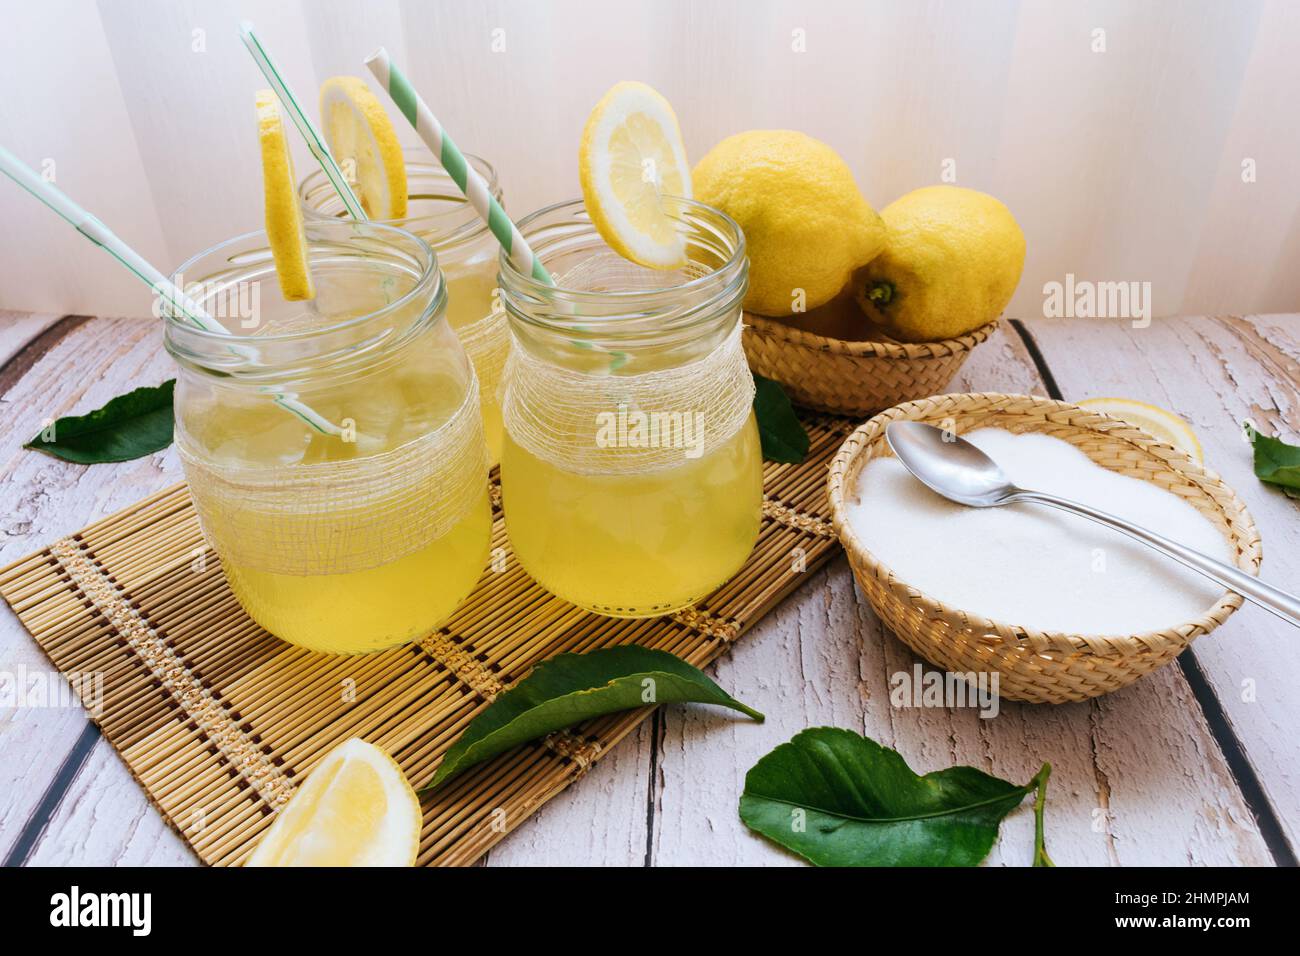 Three glasses of homemade lemonade on a table with fresh lemons and a bowl of sugar Stock Photo